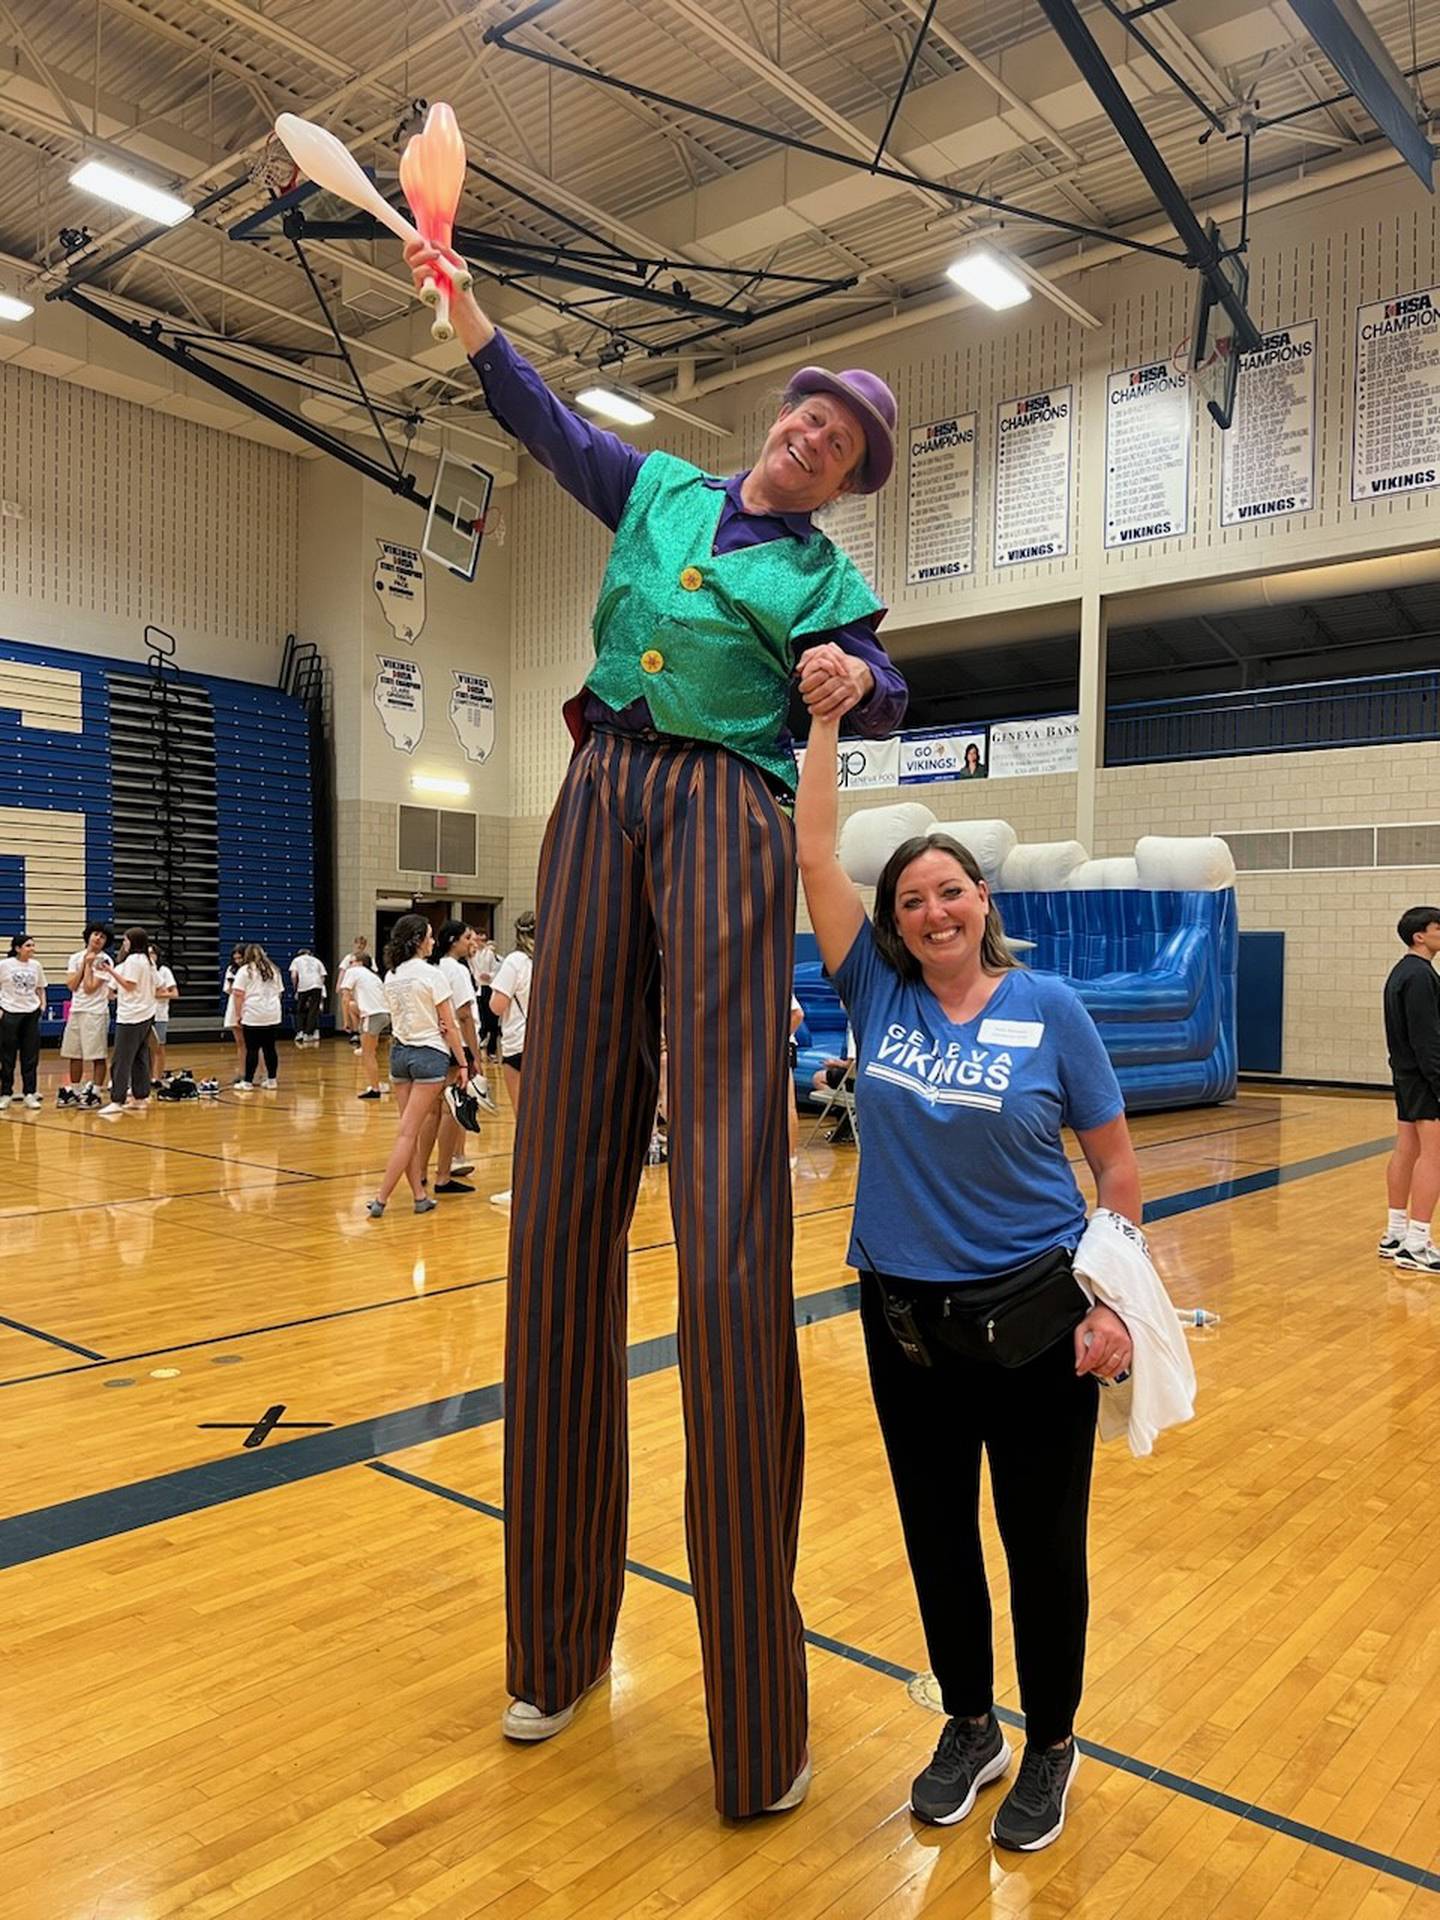 Geneva High School's 2023 post prom party featured a performing troupe that included a juggler on stilts. Post prom chair Holly Kennedy, right, said she needs more volunteers for this year's event.